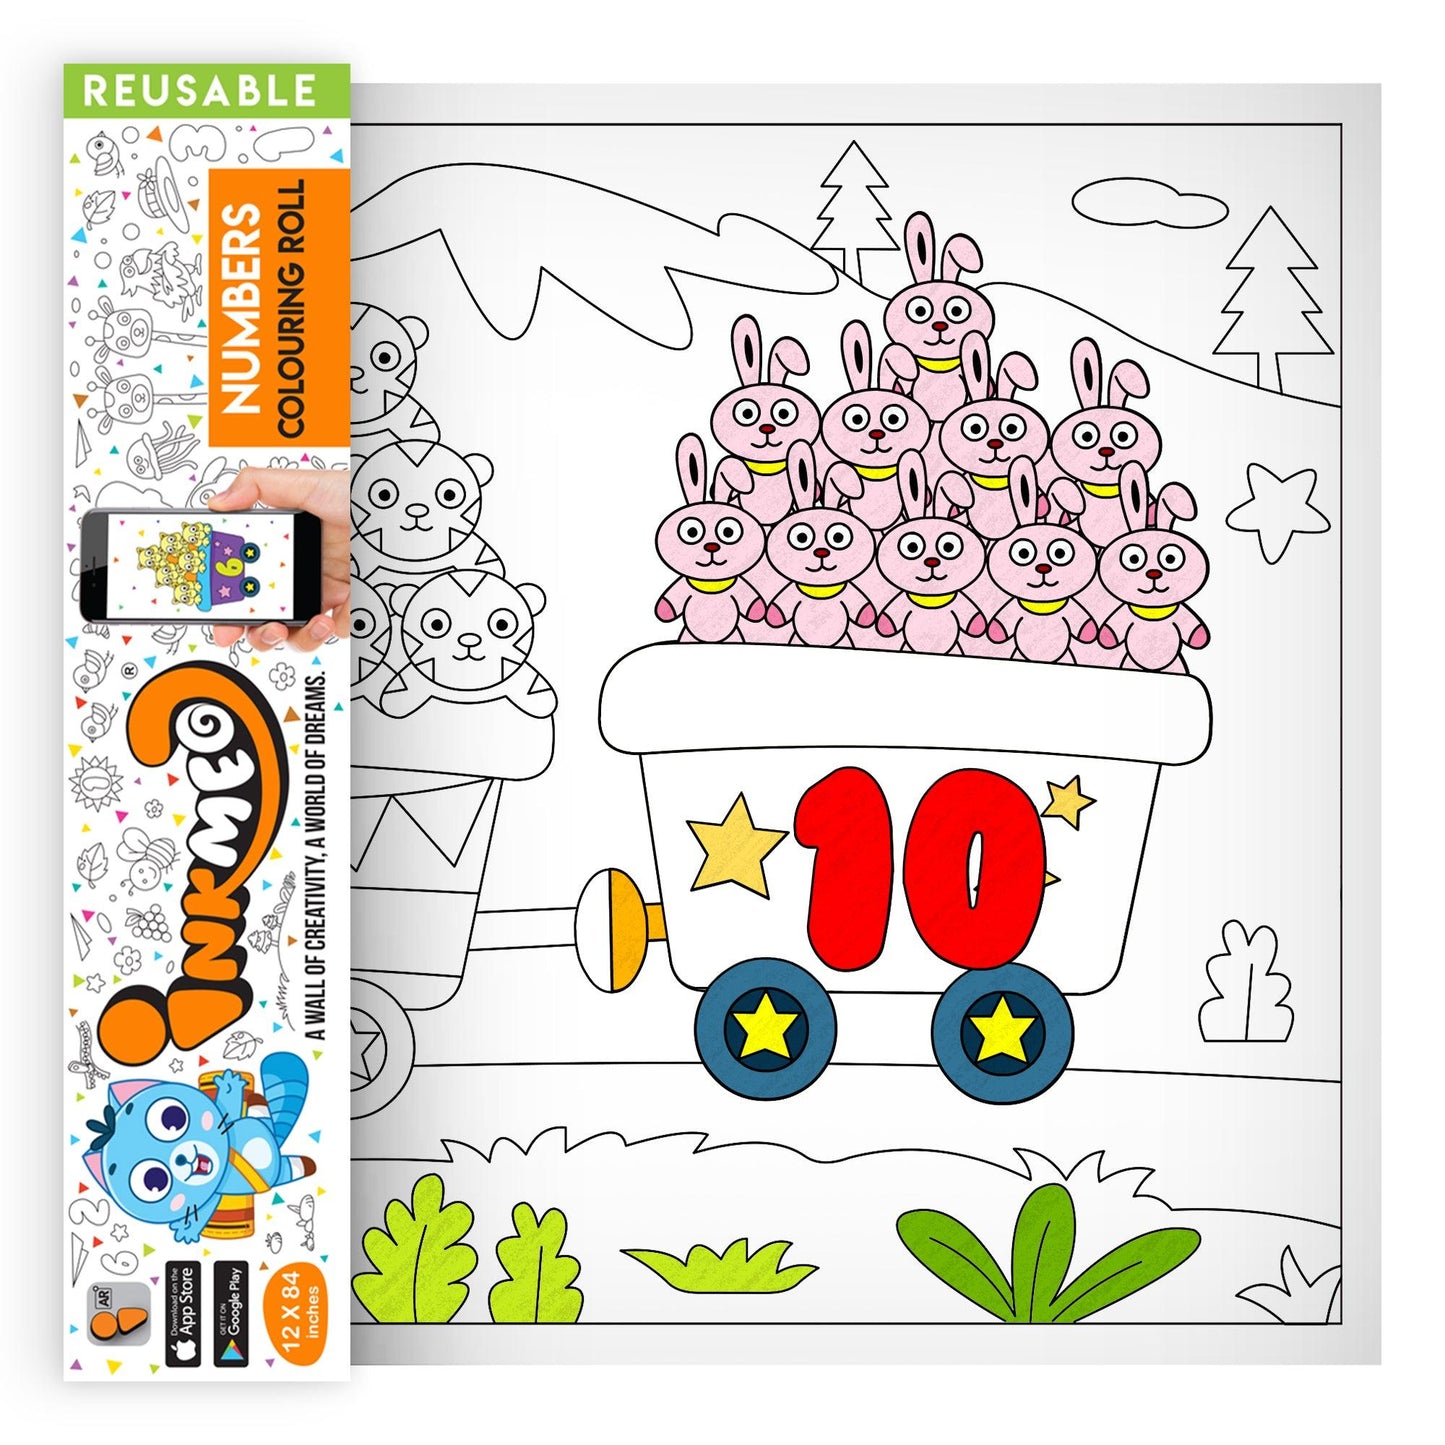 The image depicts a roll being pulled out from the triangular box, displaying colourful pictures.